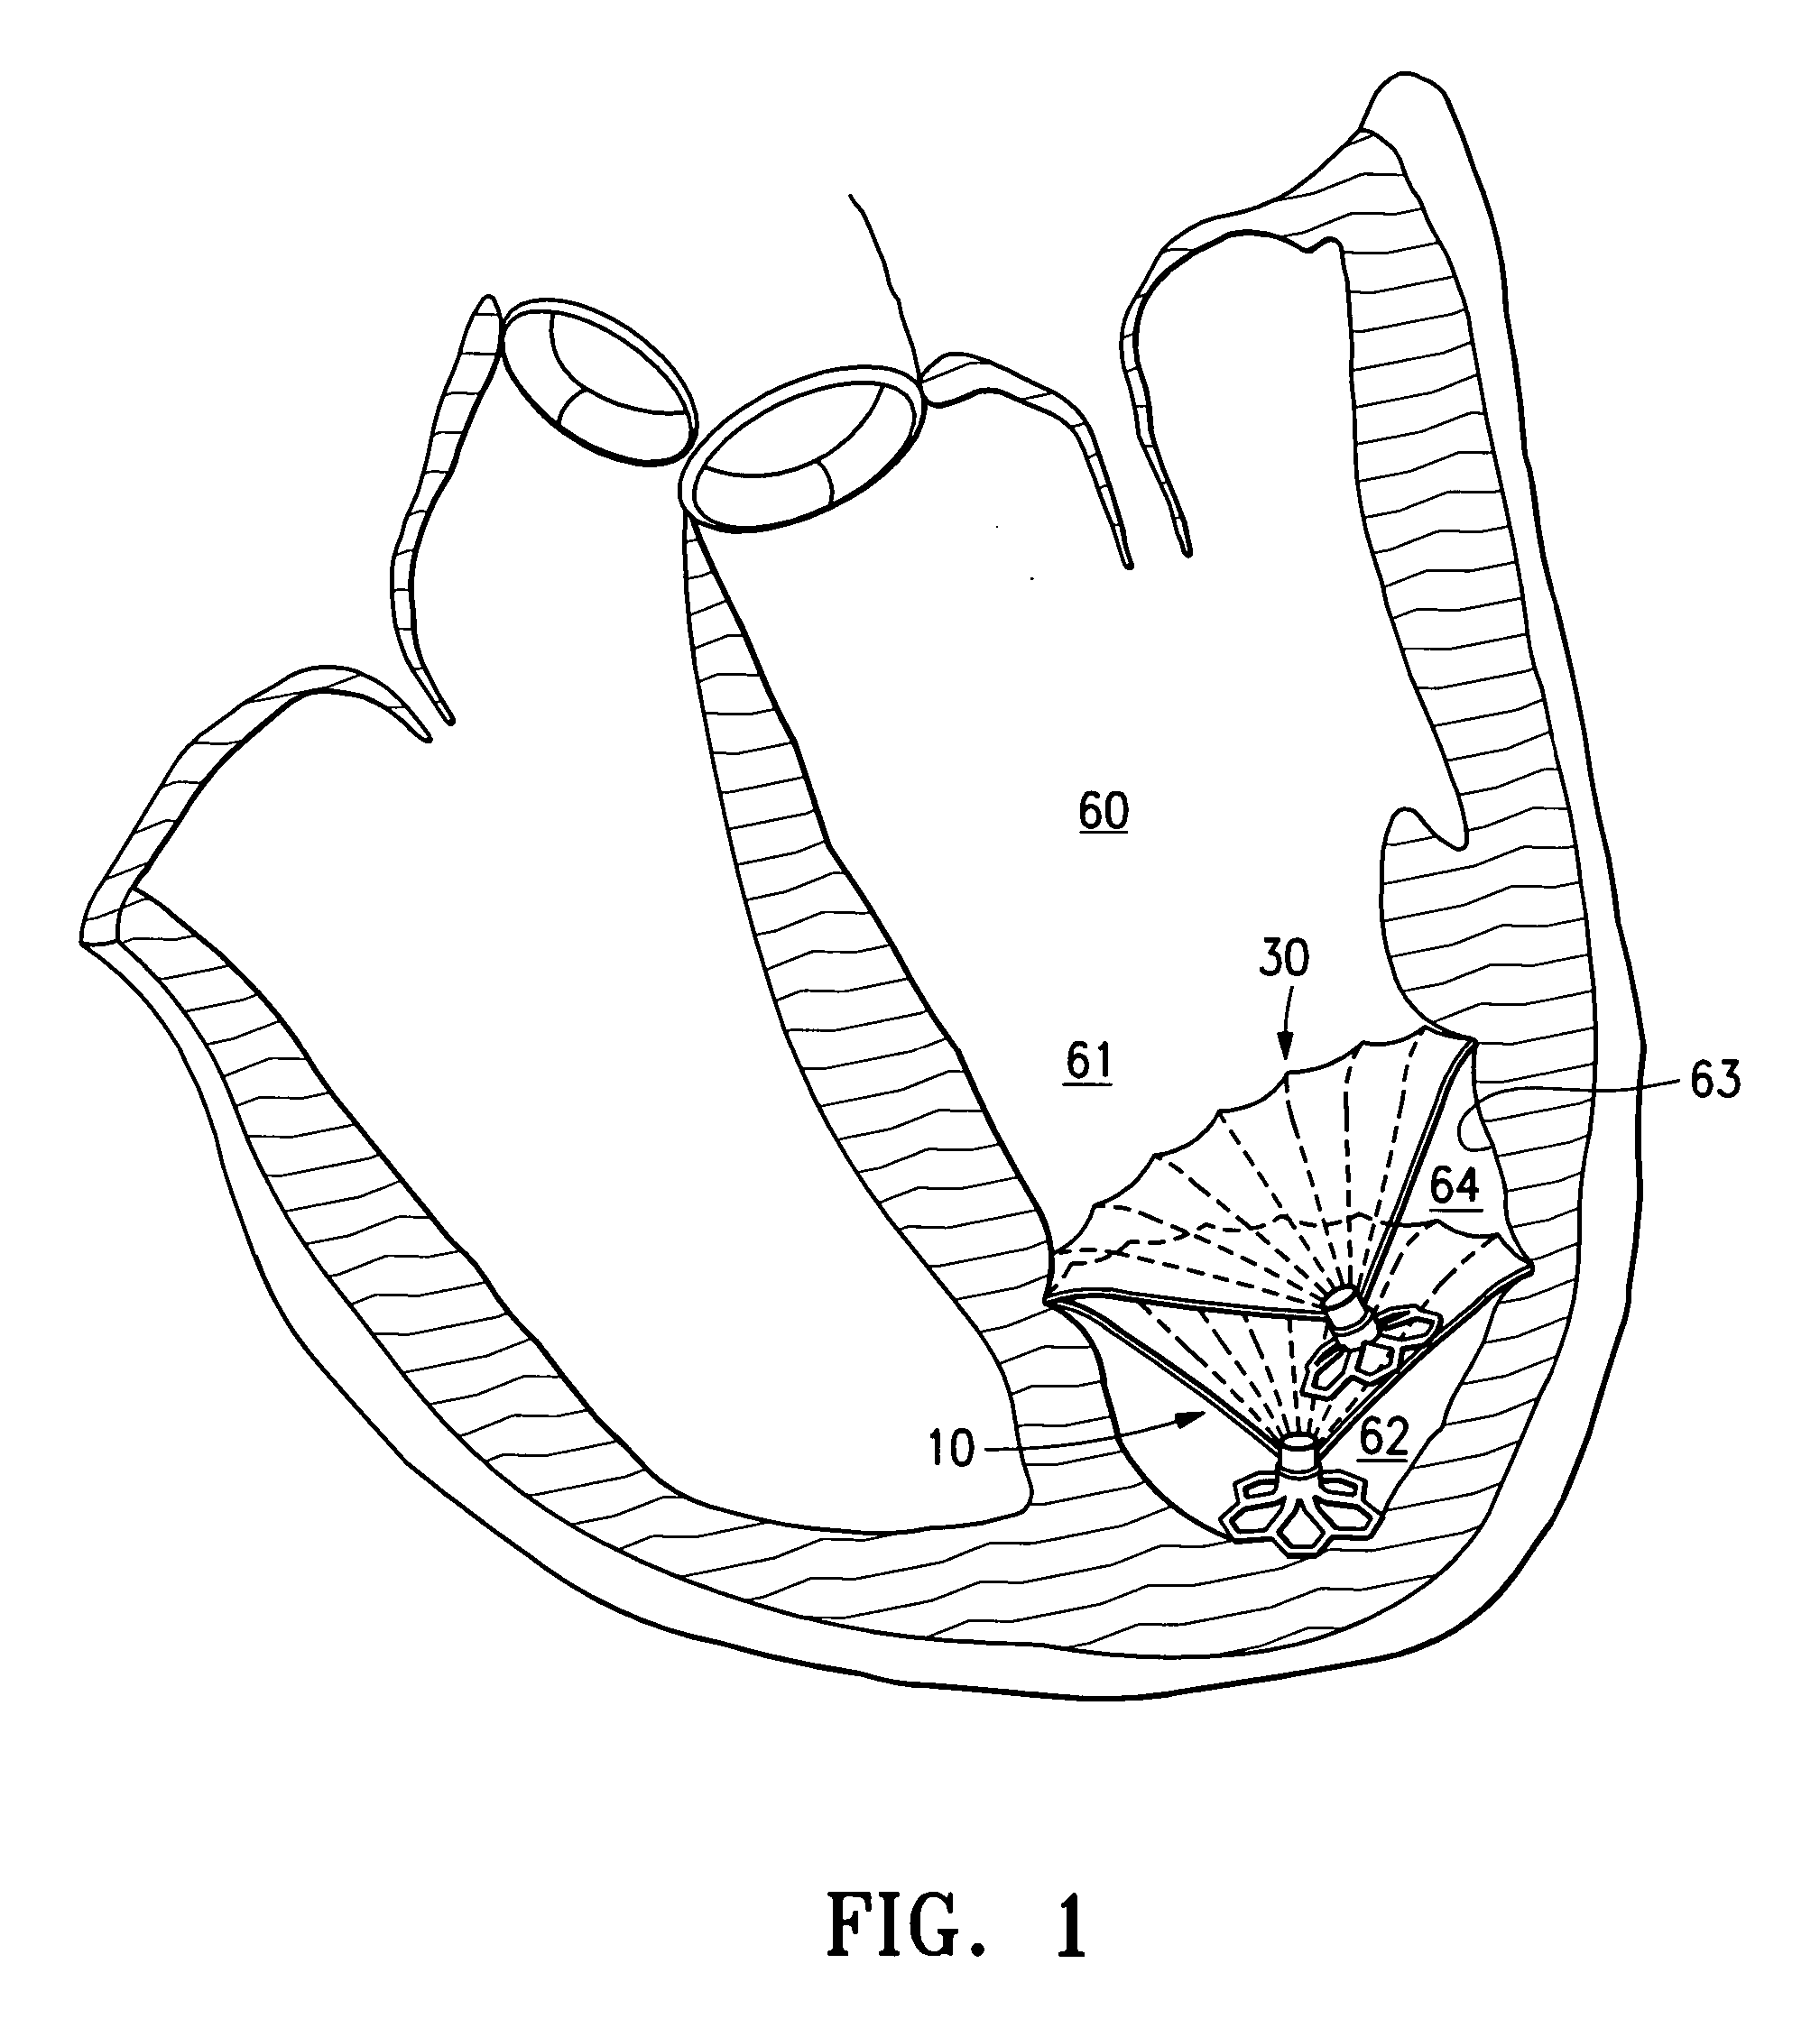 Multiple partitioning devices for heart treatment